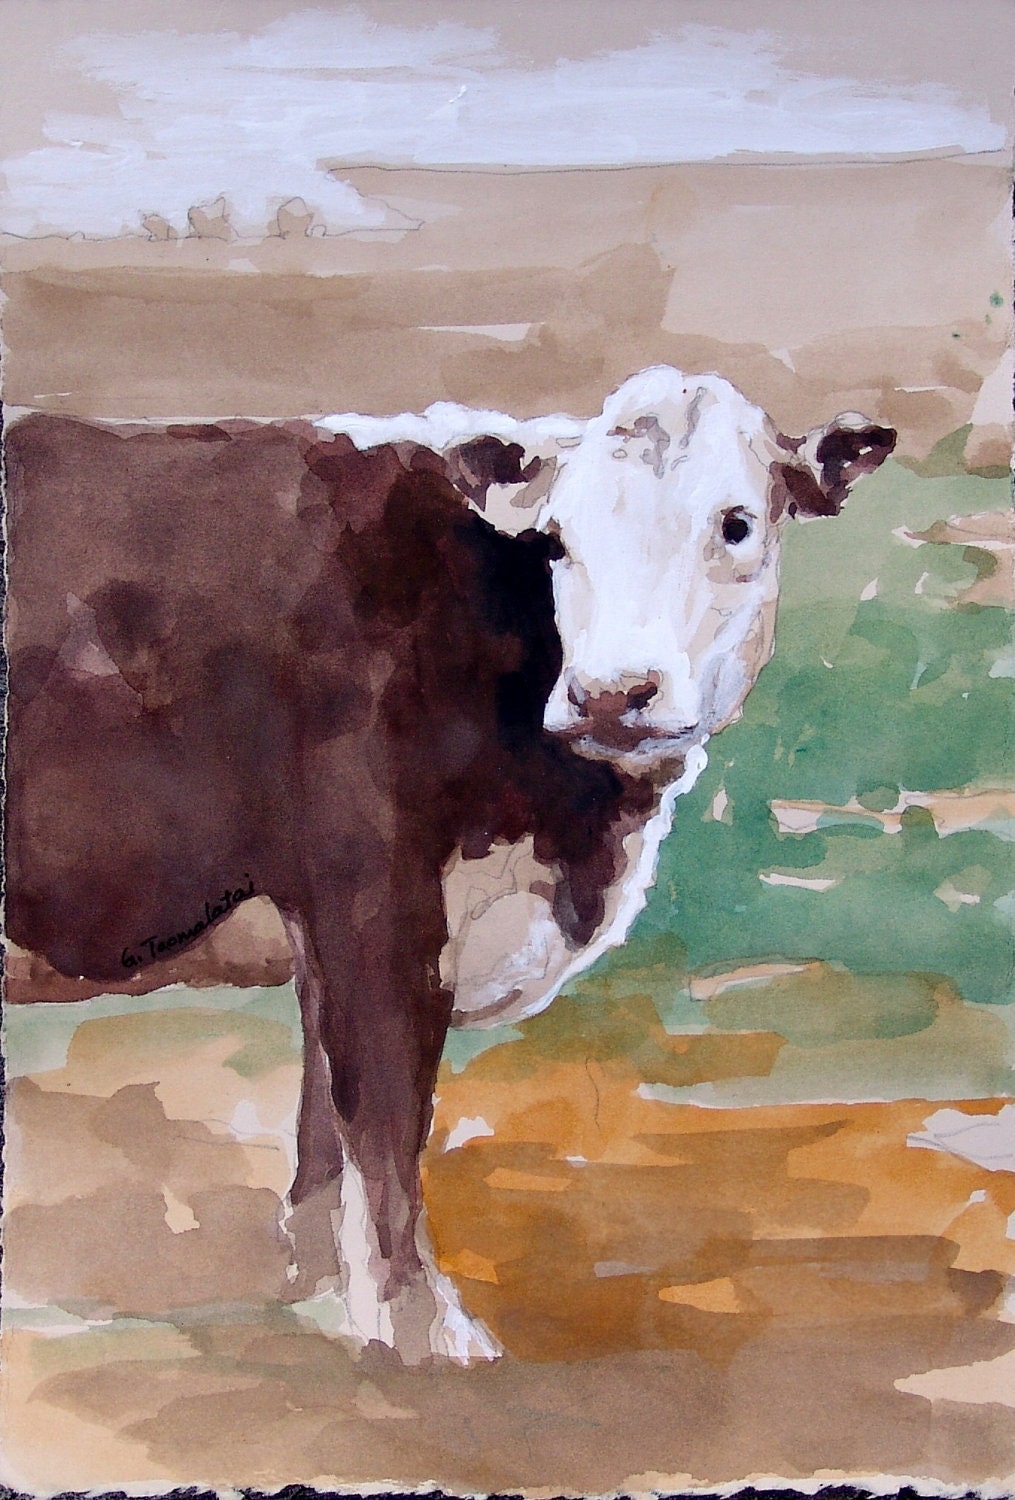 Brown cow white faced cow watercolor painting 11 x 7.5 inches cow art landscape art original watercolor acrylic painting